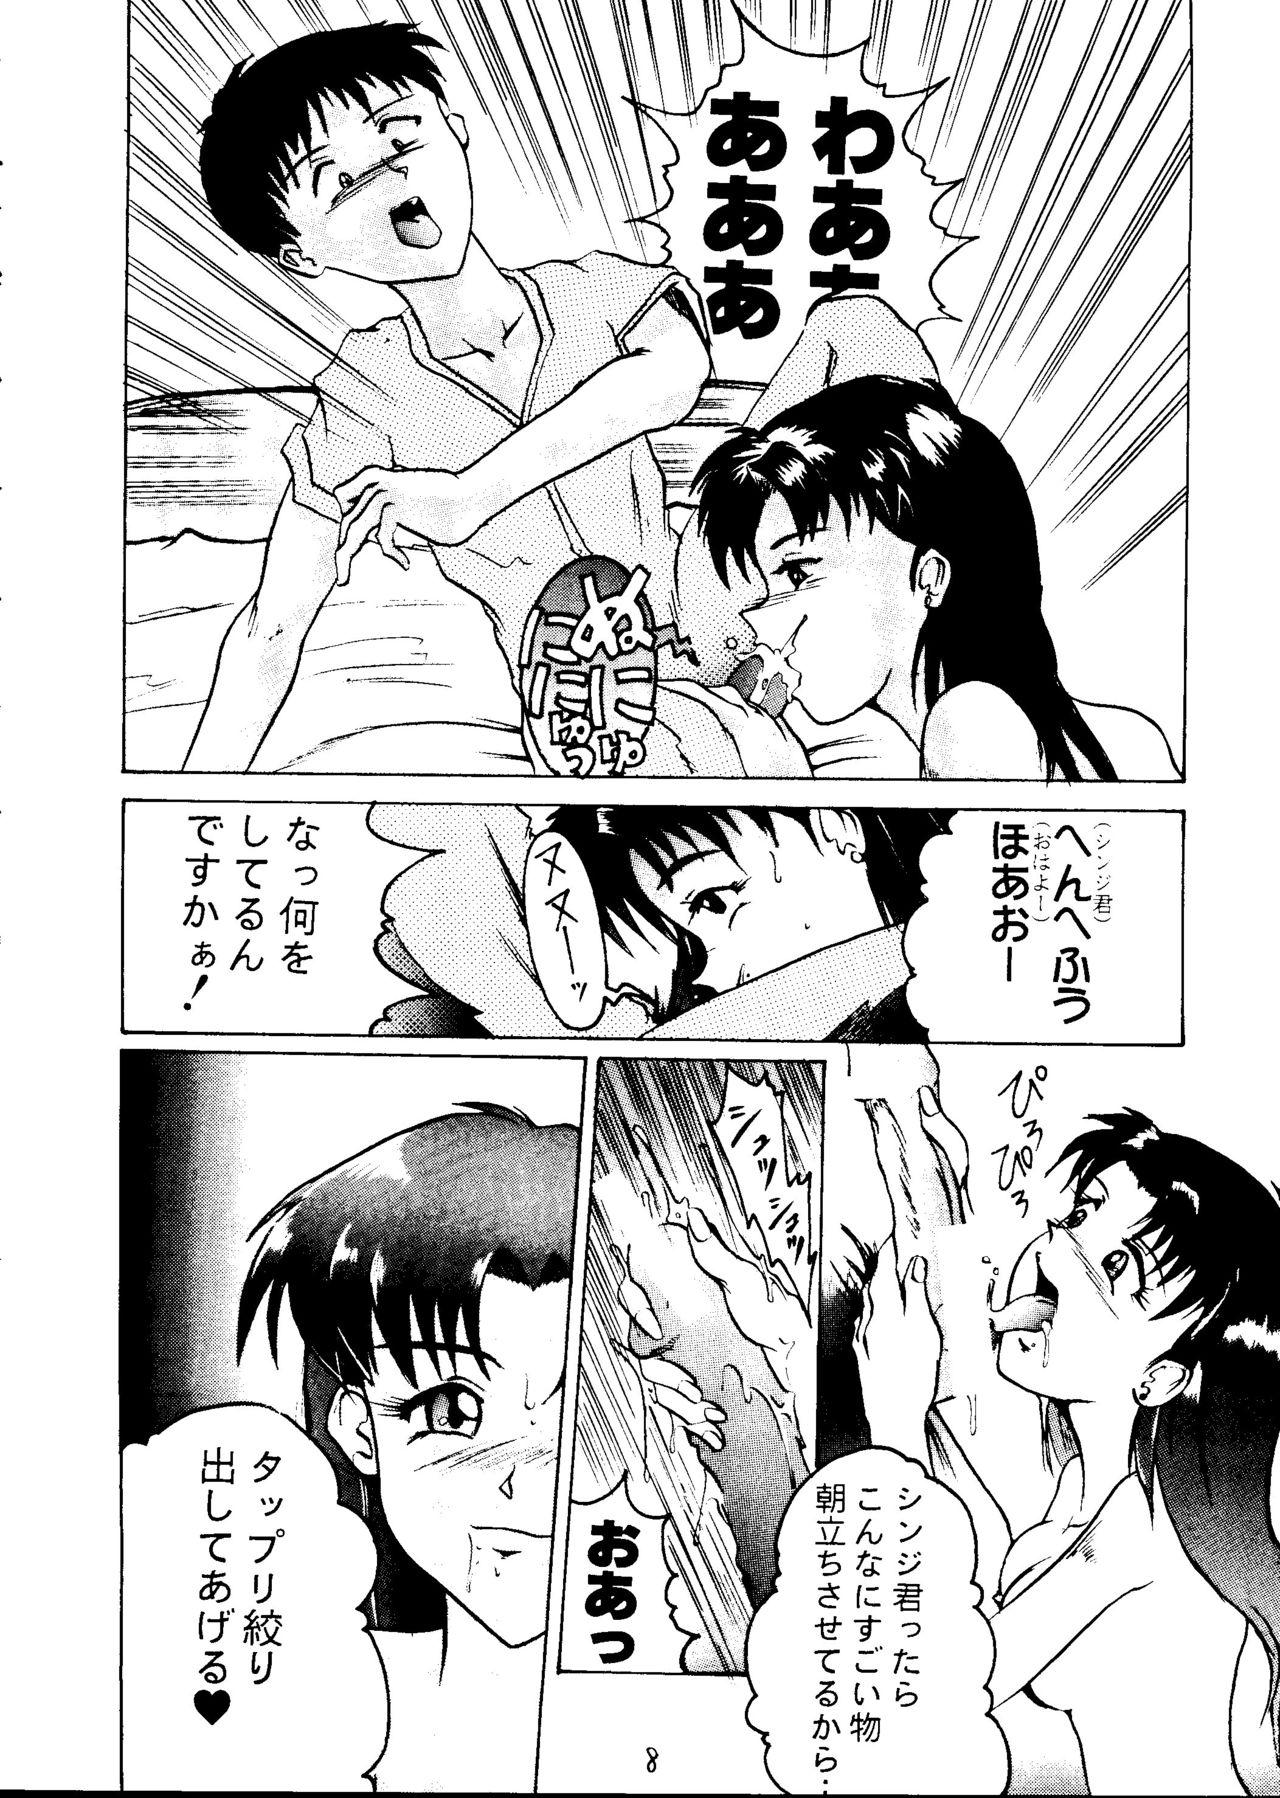 Perfect Pussy Shadow Defence 2 - Neon genesis evangelion Tenchi muyo Slayers Viper Sex - Page 7